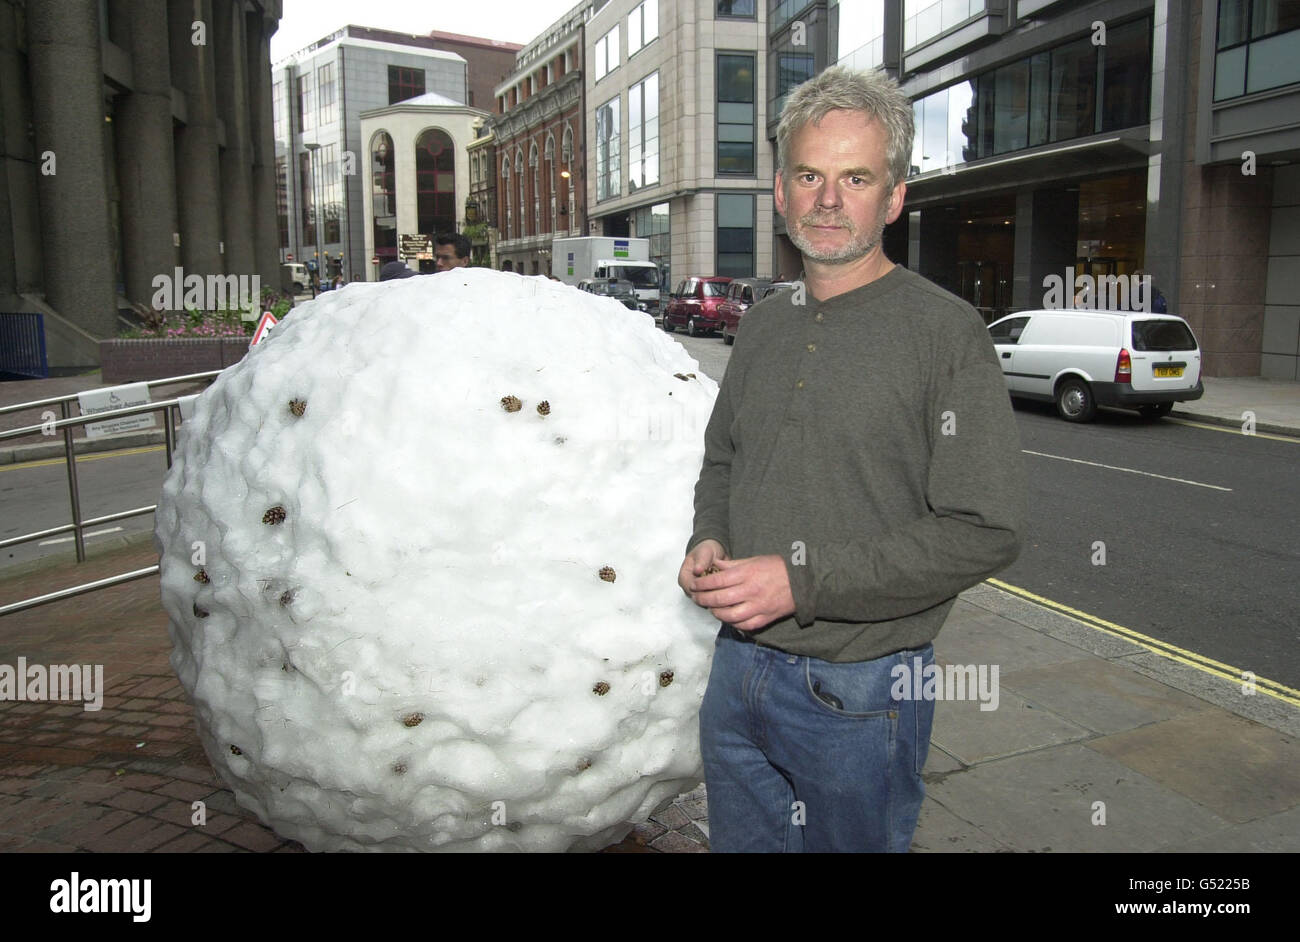 British sculptor Andy Goldsworthy stands in a London street next to a snowball which is forming part of an unusual art exhibition. The thirteen one ton snowballs will melt over a period of three to five days to reveal different materials. * which he packed into them, including sheep's wool, chestnut seeds, elderberries and barbed wire. Stock Photo